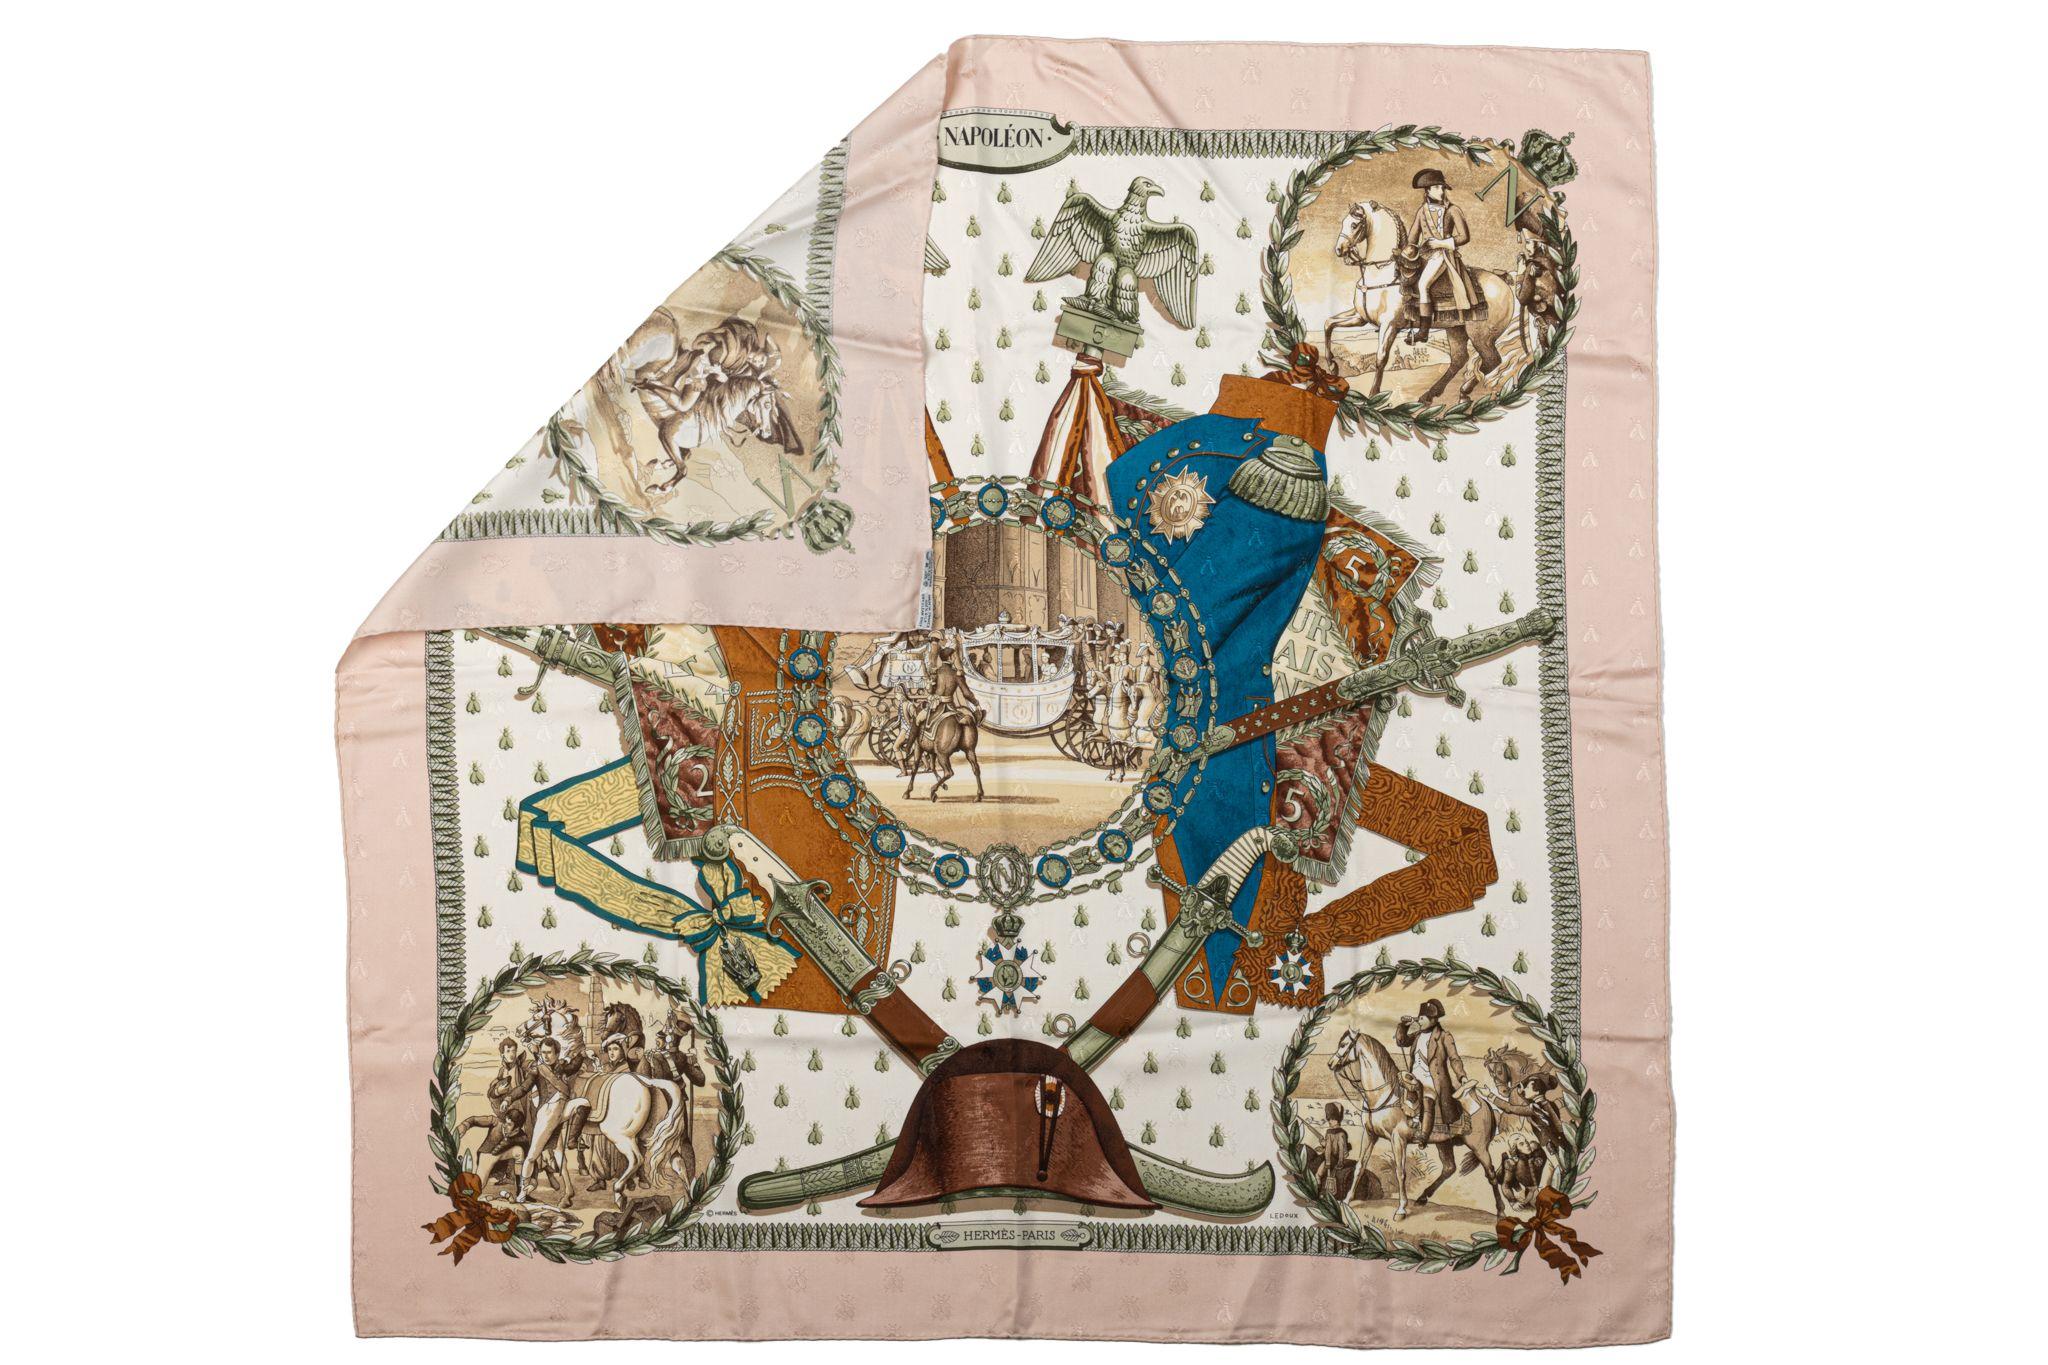 Hermès 100% silk twill scarf with hand-rolled edges. Napoleon collectible design in pink. Dry clean only. Does not include box.
